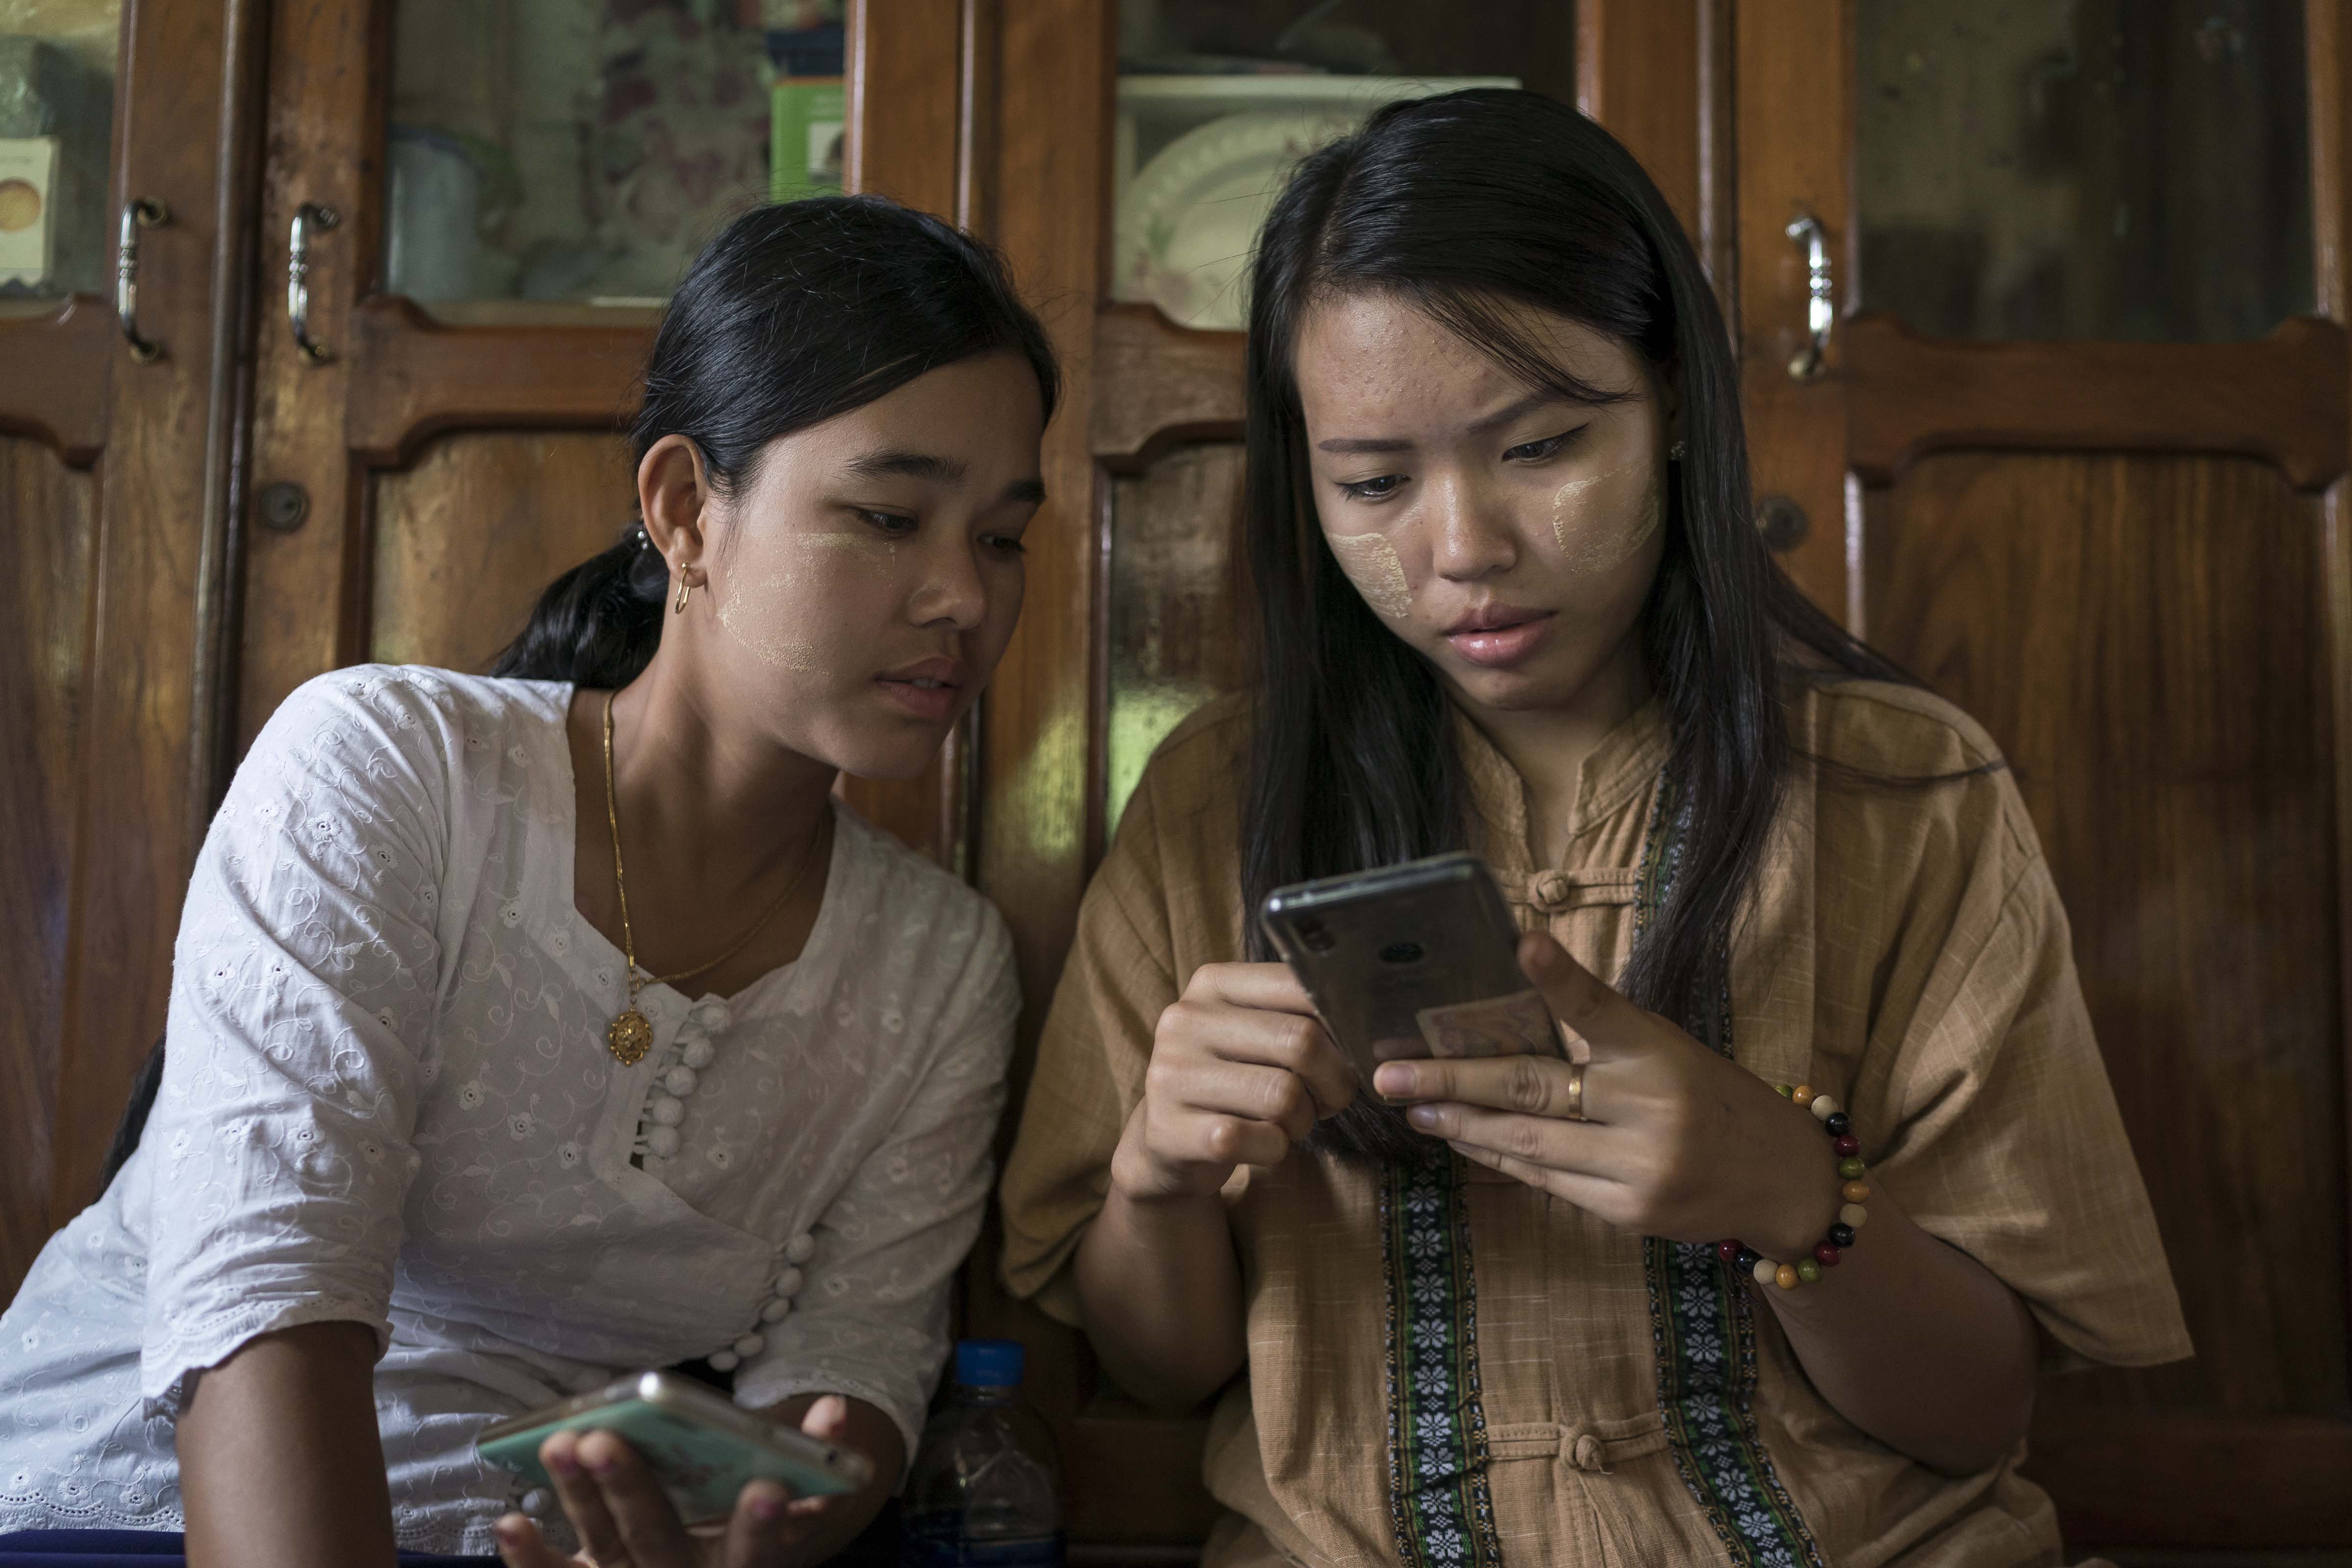 Two women looking at mobile device